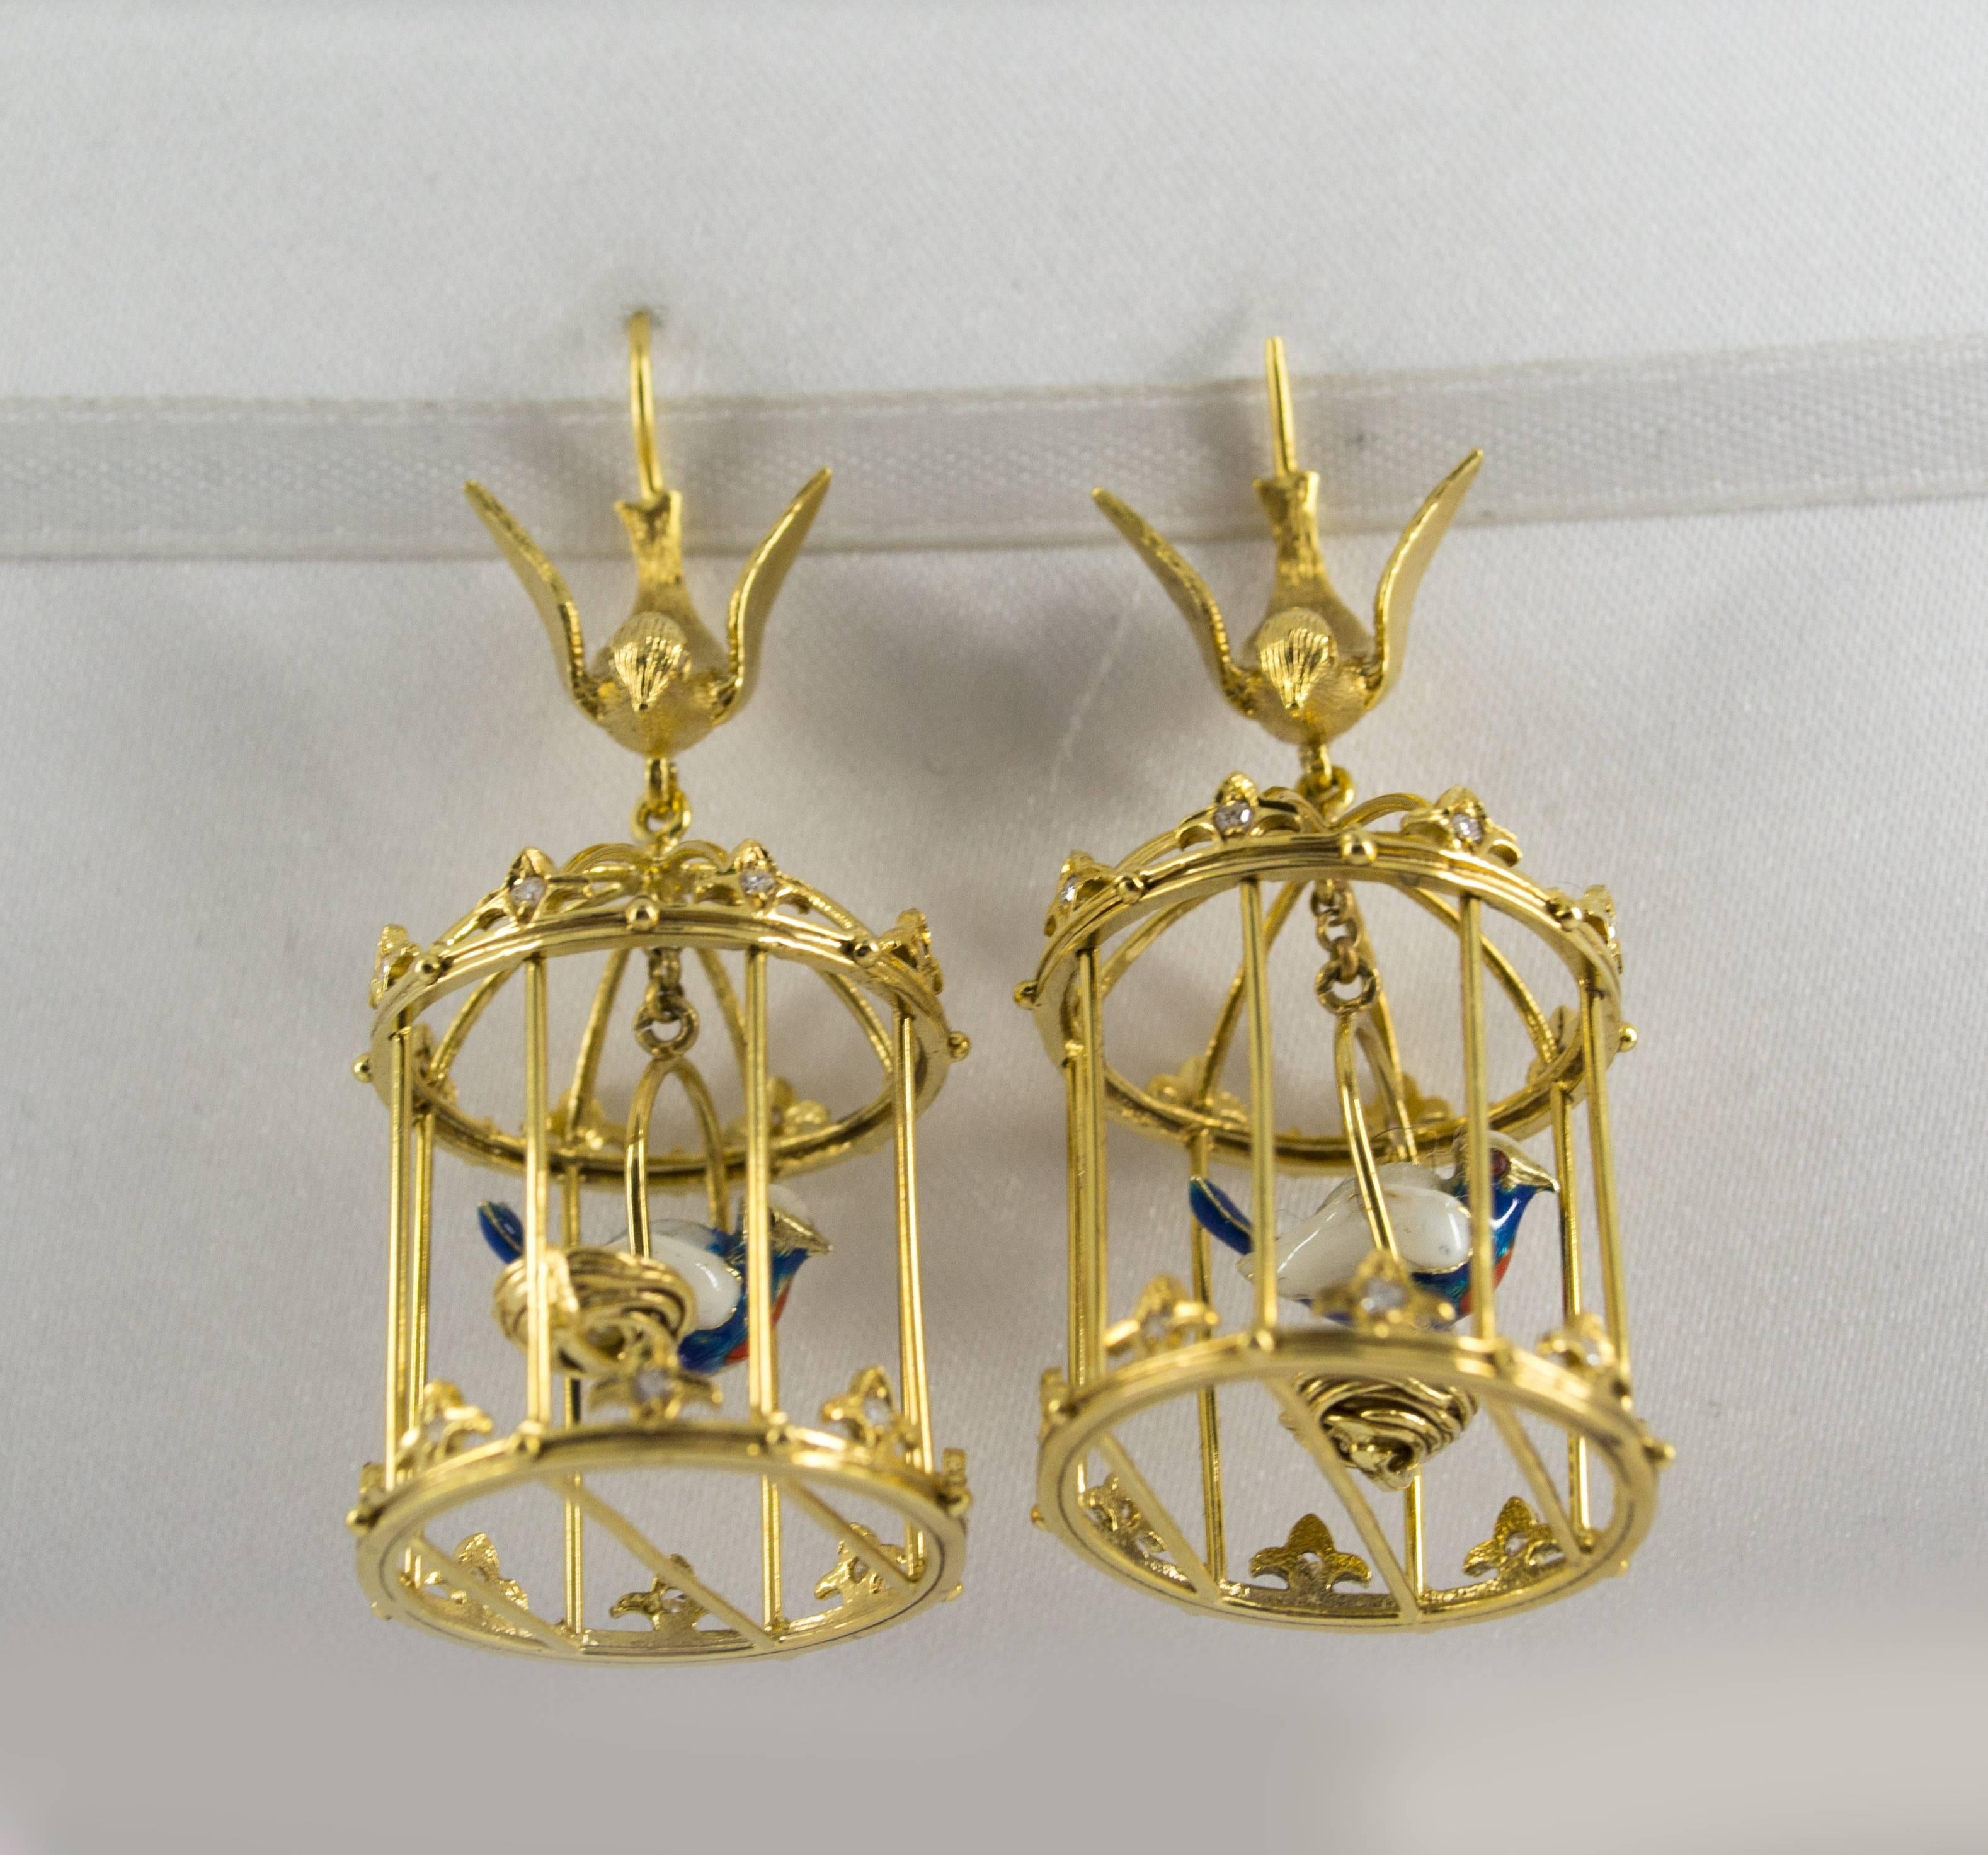 These Earrings are made of 9K Yellow Gold.
These Earrings have 0.35 Carats of Diamonds.
These Earrings have also Enamel.
We're a workshop so every piece is handmade, customizable and resizable.